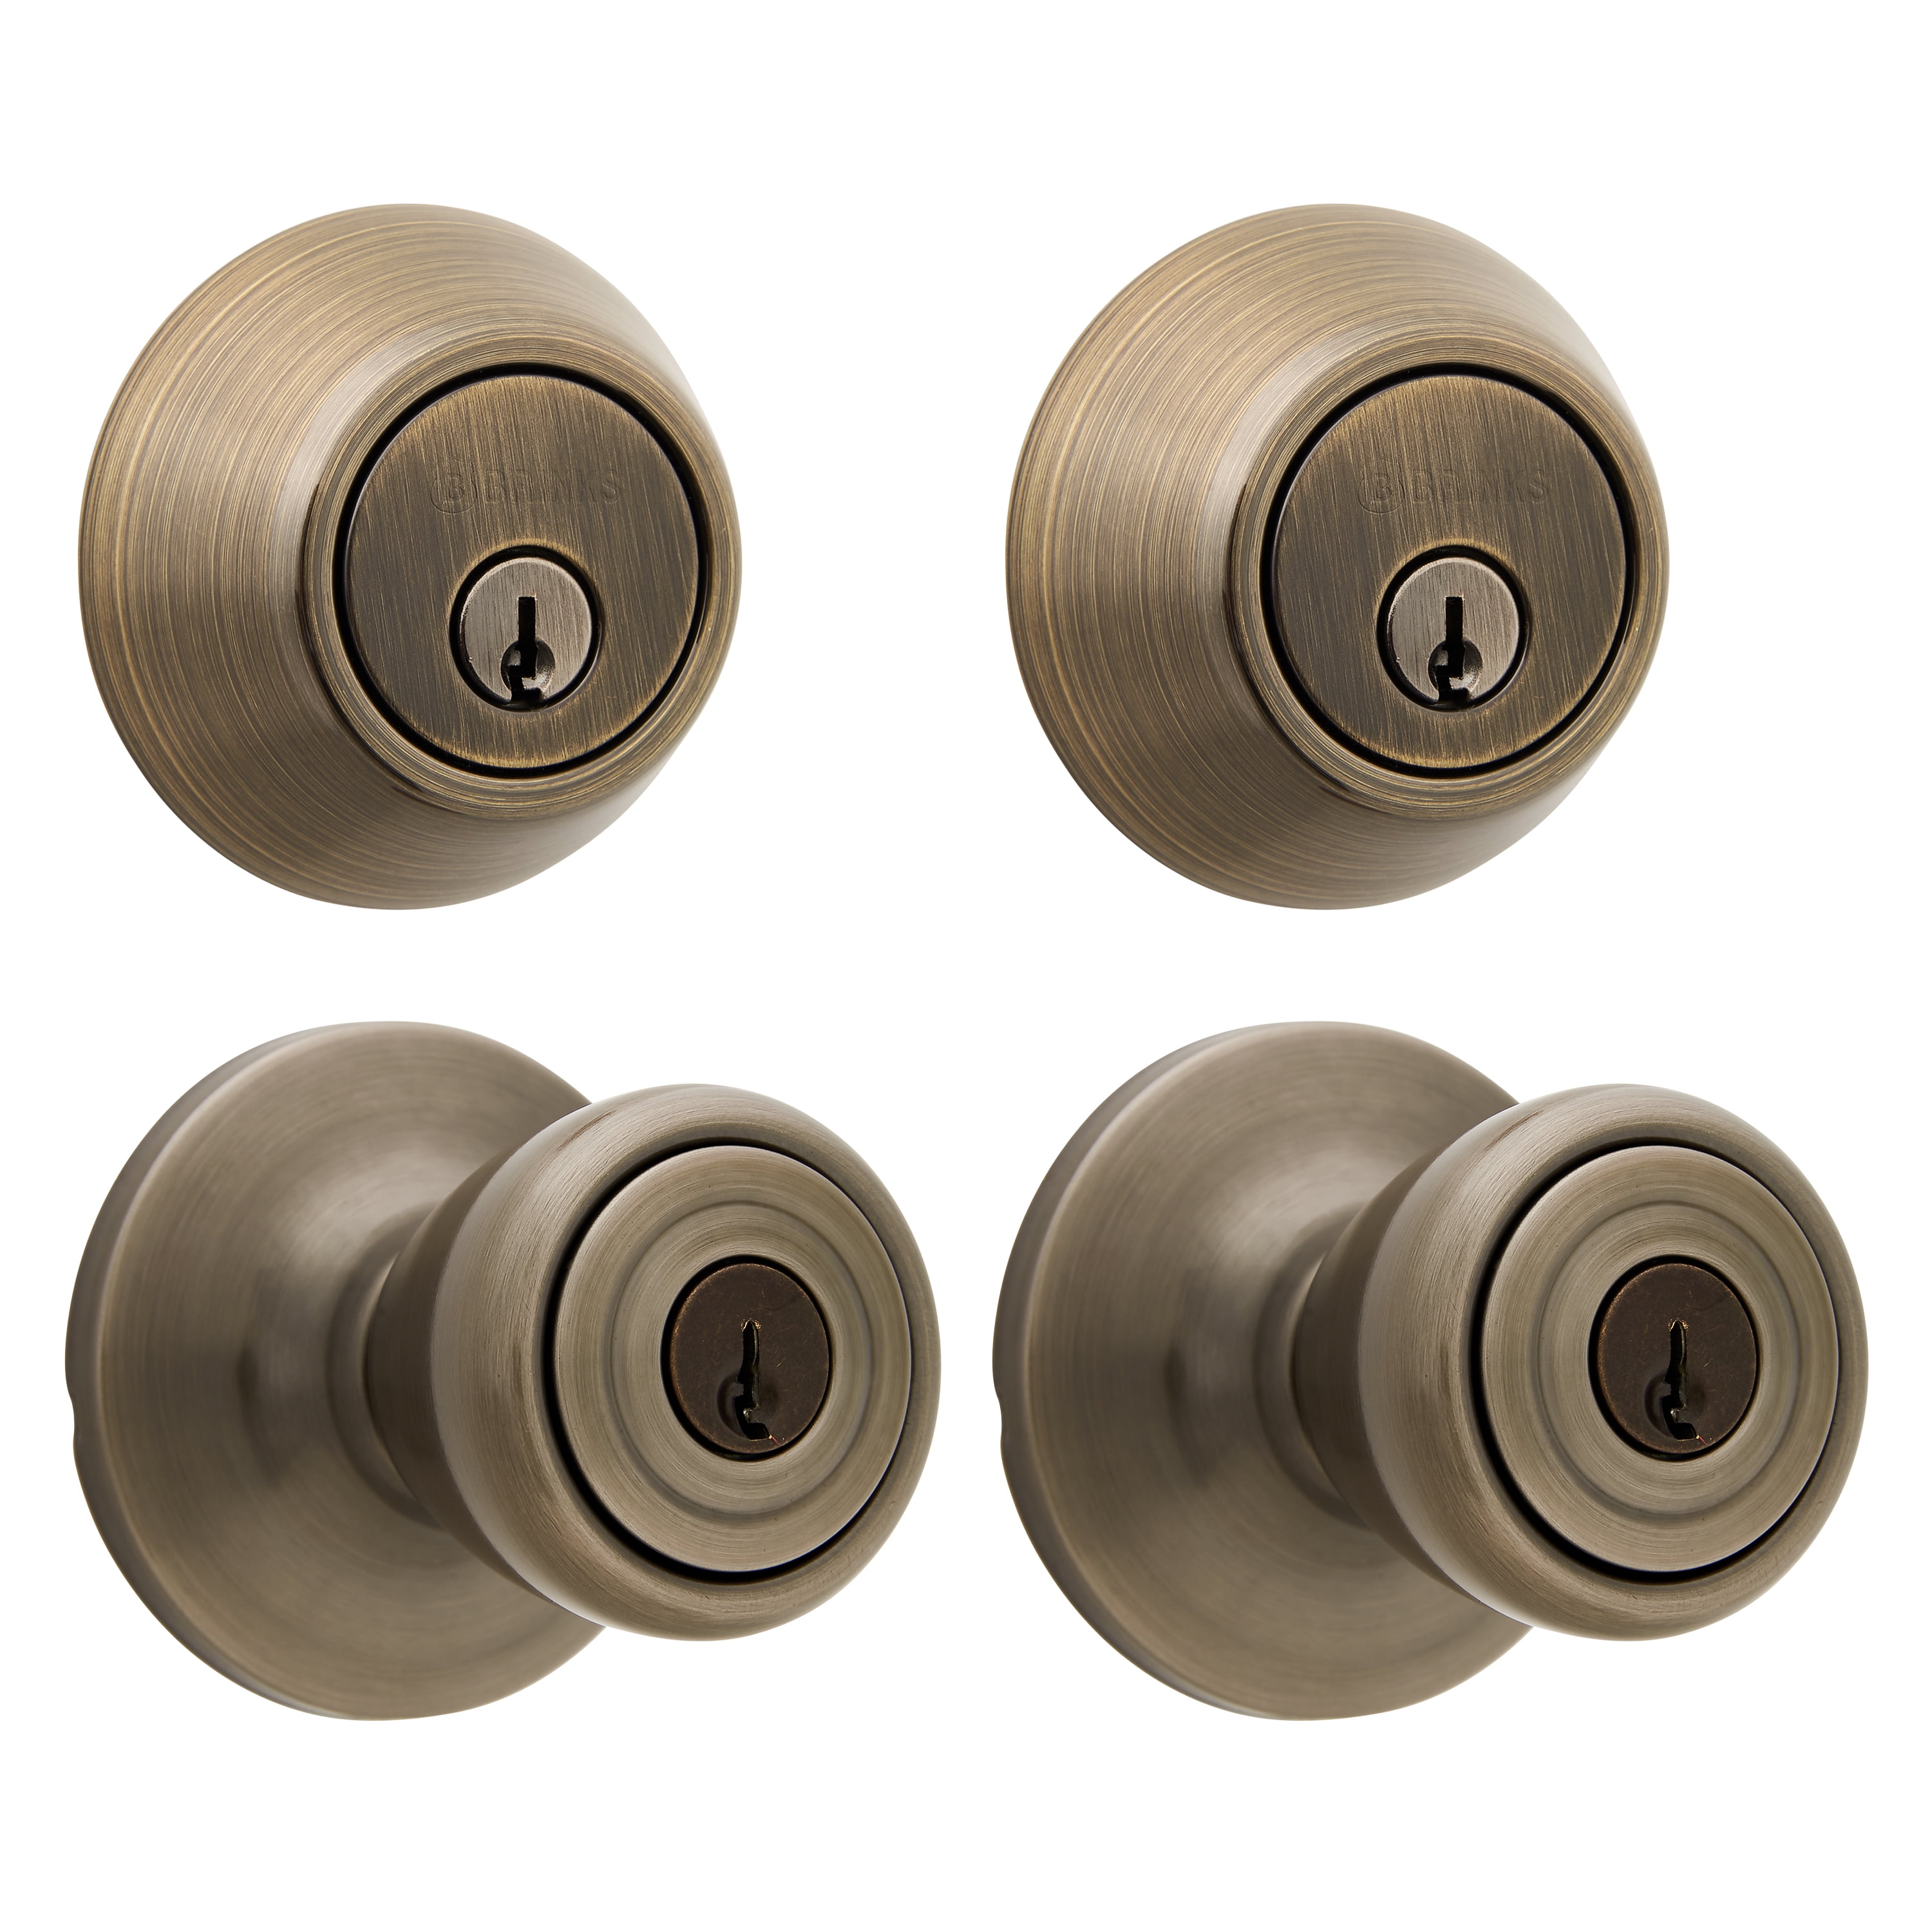 Kit to Install Your Vintage or Replacement Knobs in Any Door-Antique Brass 